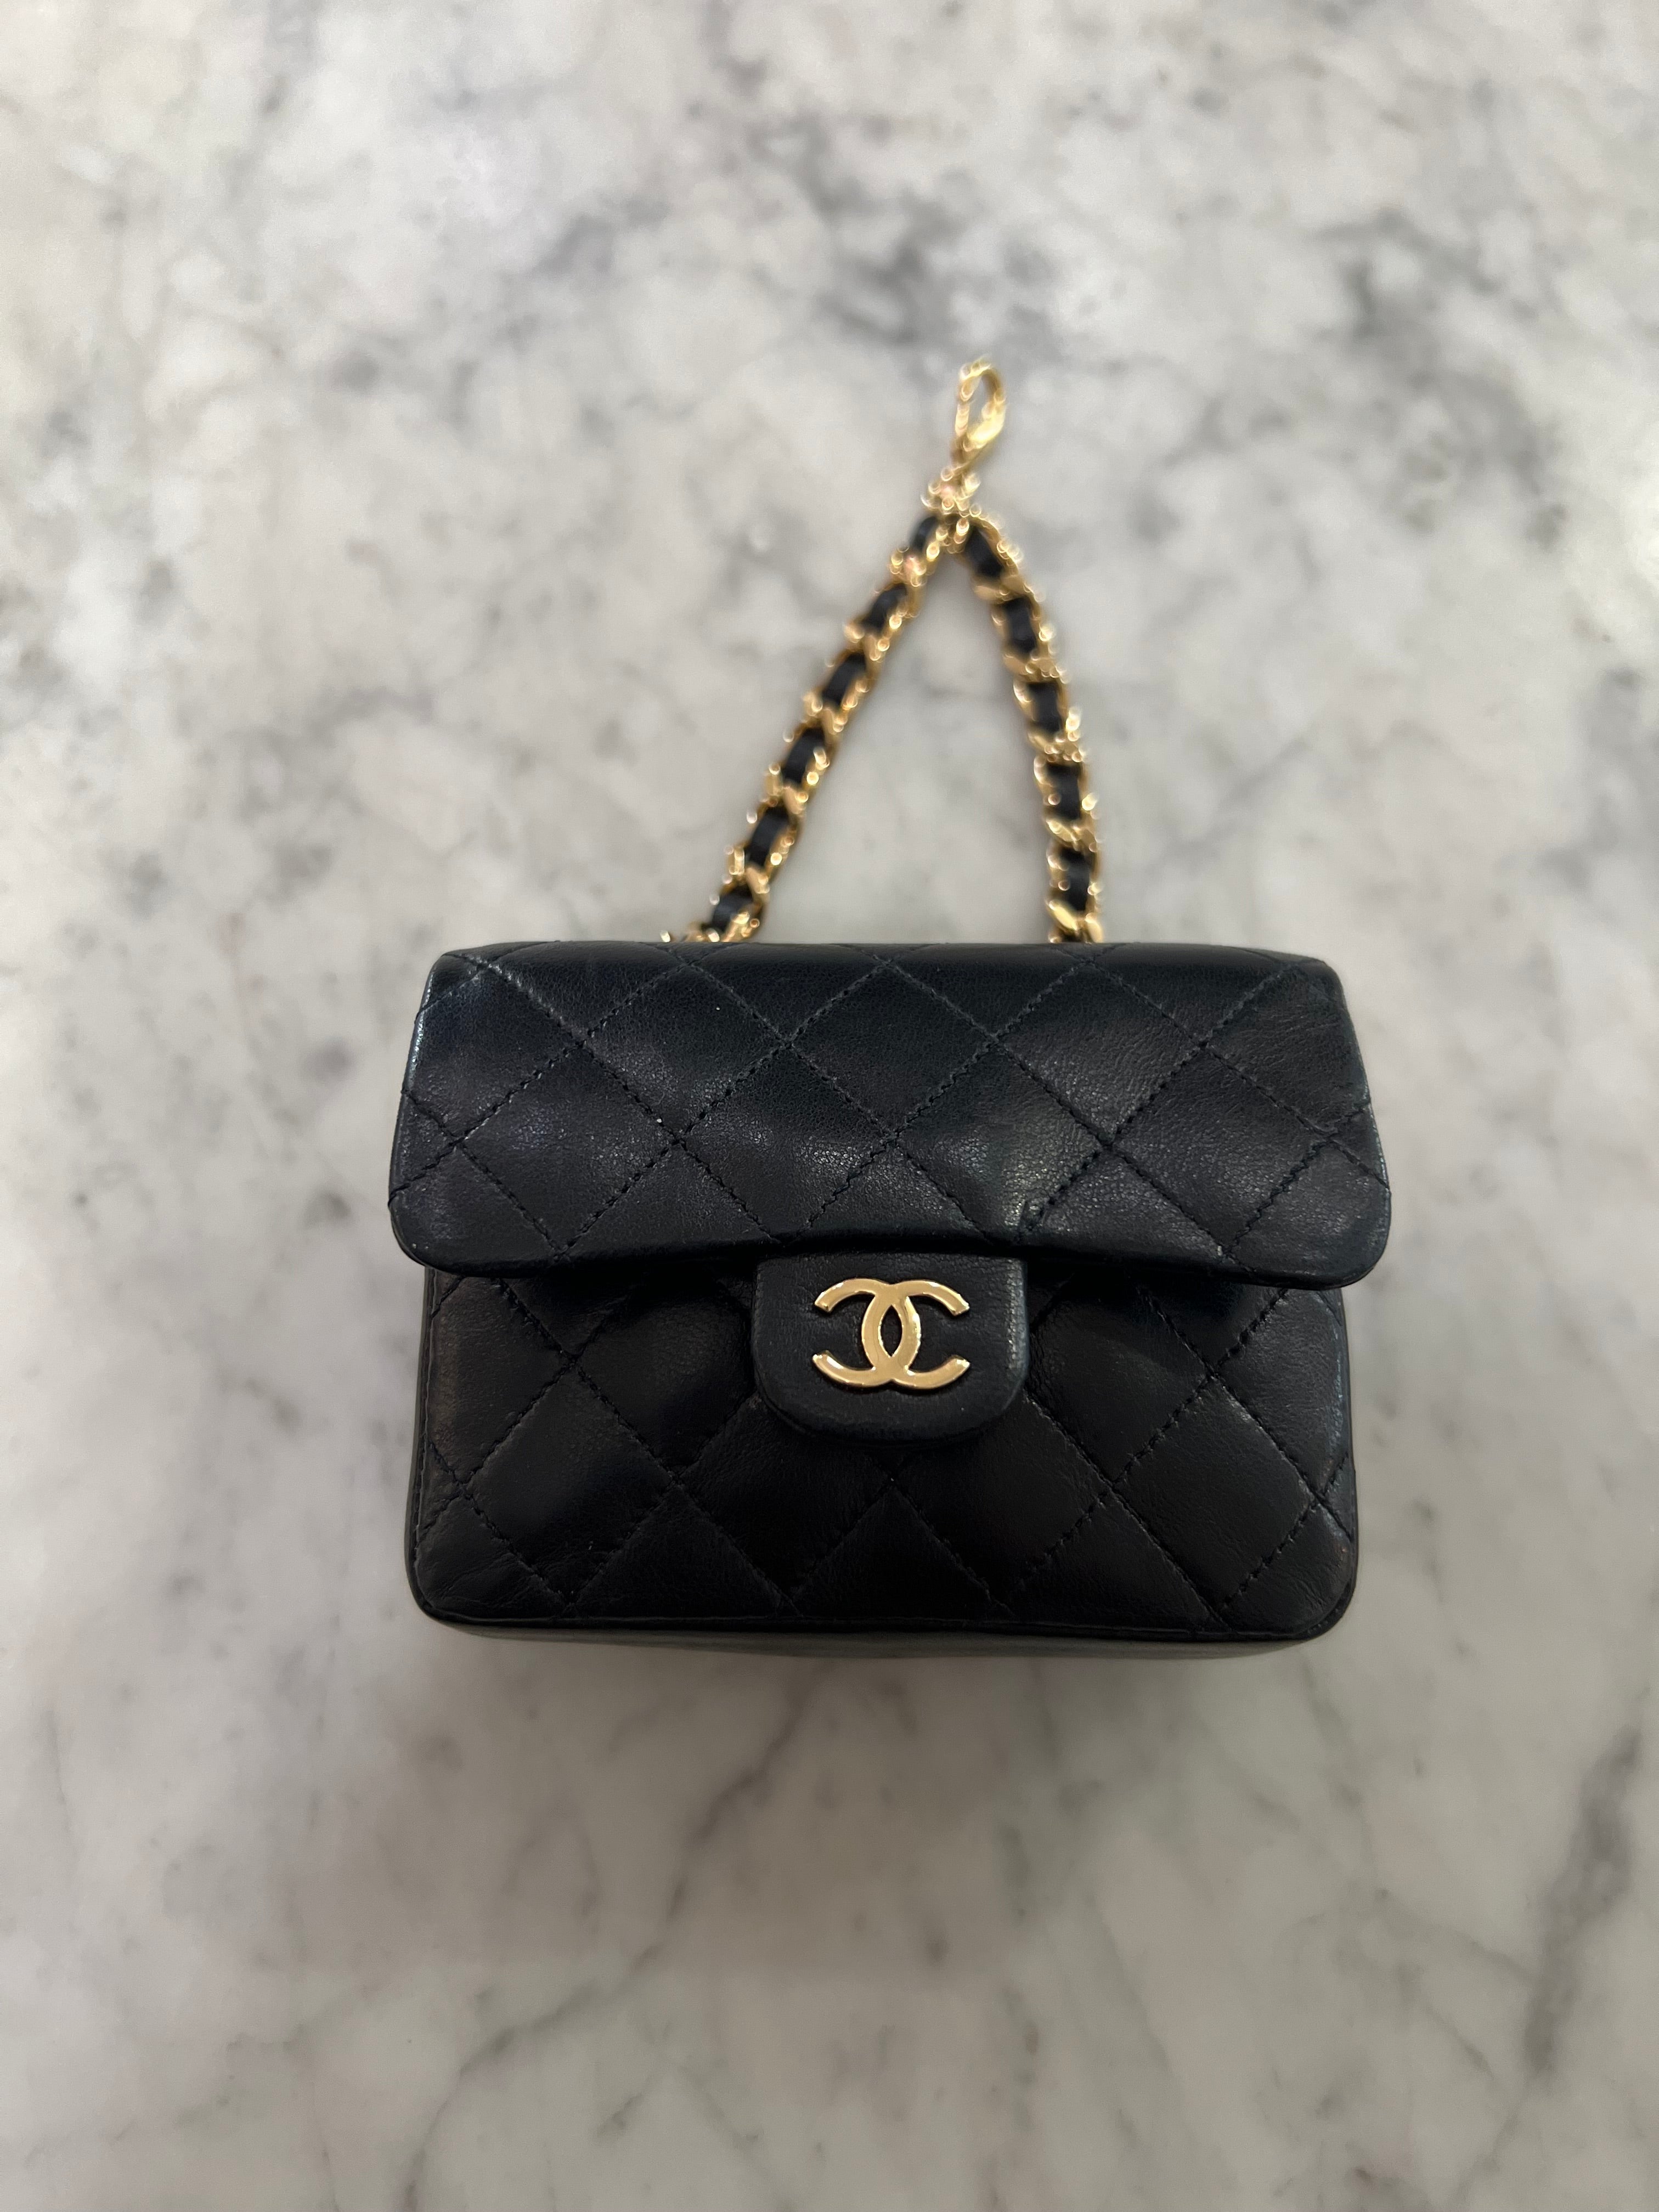 Rare Vintage Chanel Quilted Hanging Micro Belt Bag- Gold